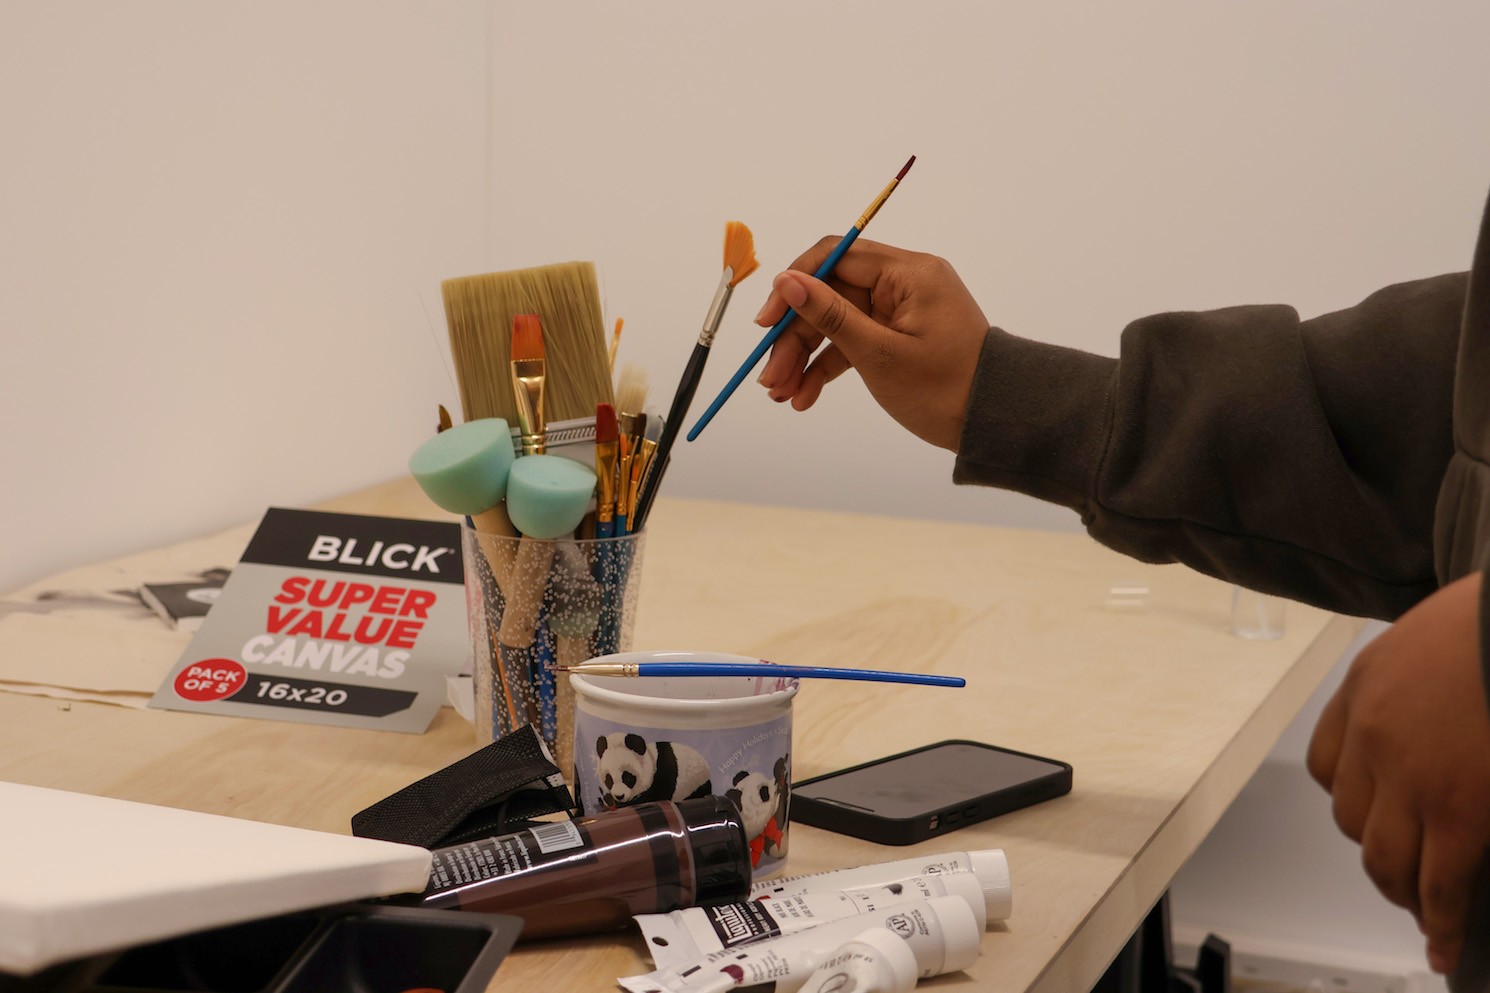 Keydi Alvarez pulls out a small-sized brush from a glass filled with an assortment of brushes on the table.